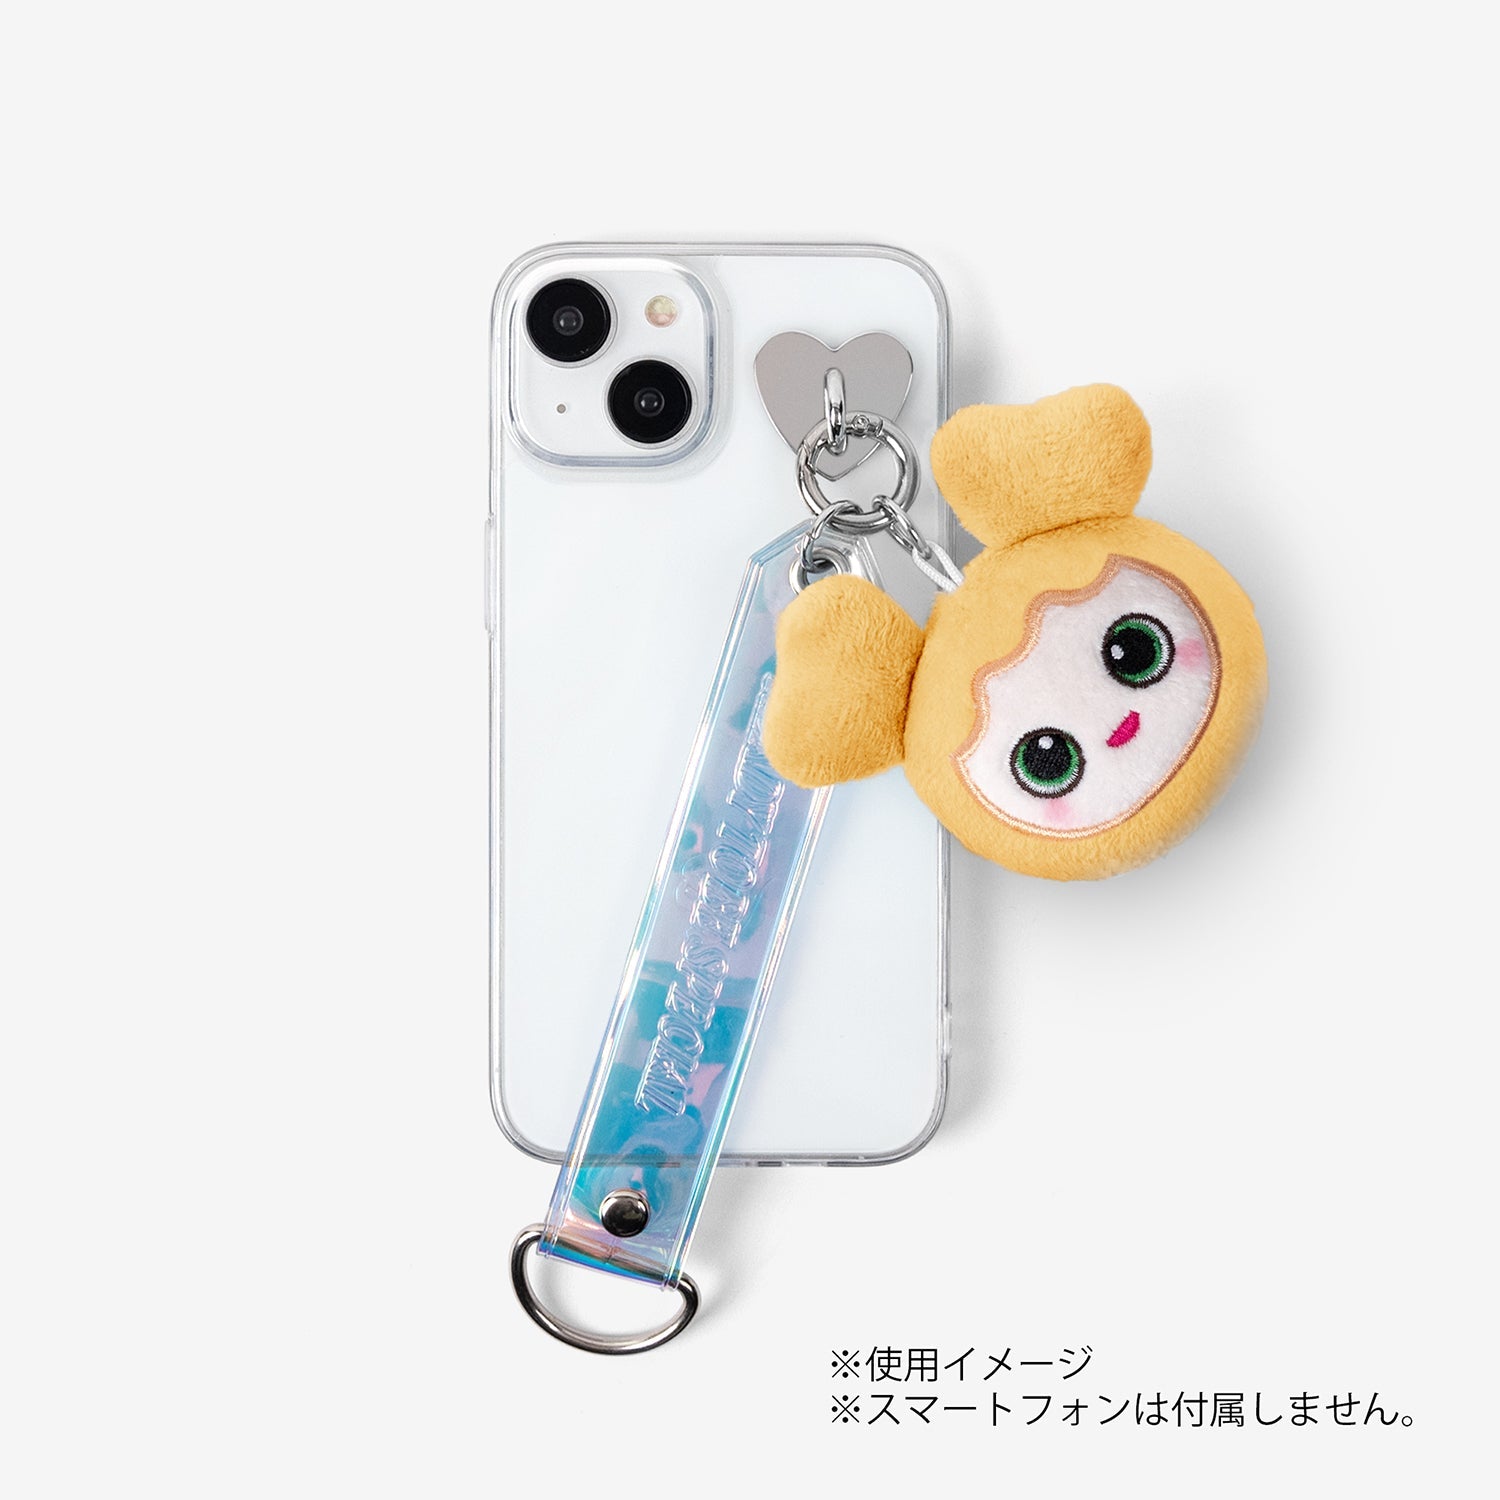 BABY LOVELYS SMARTPHONE CHARM STRAP - BABY JIVELY / TWICE『READY TO BE SPECIAL』